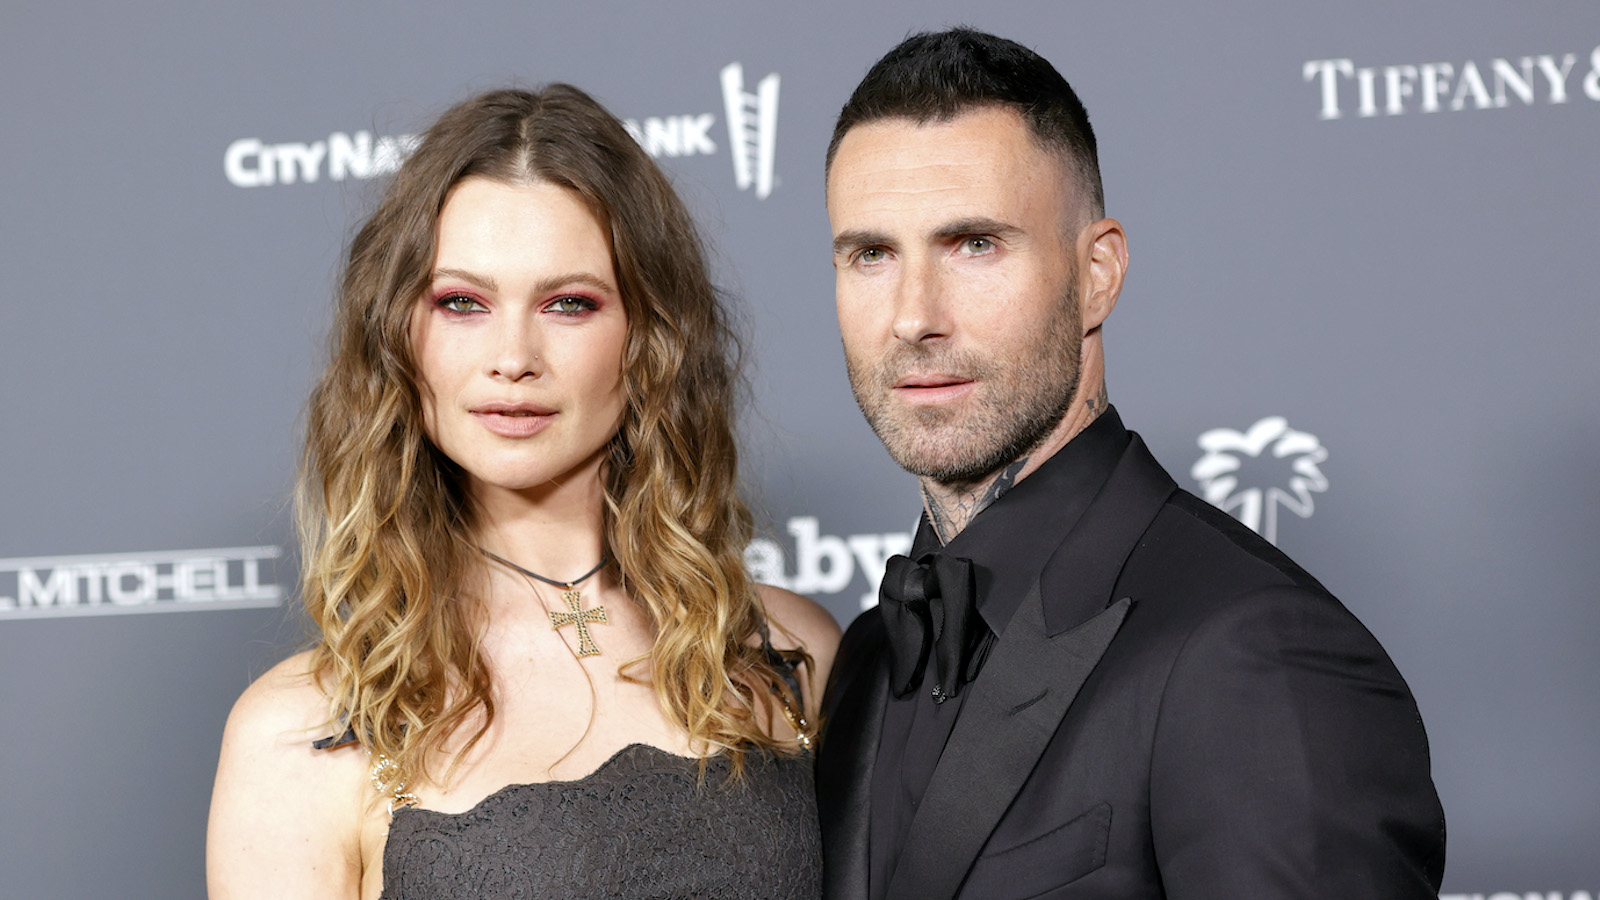 (L) Behati Prinsloo and (R) Adam Levine, both dressed in formal attire on the red carpet